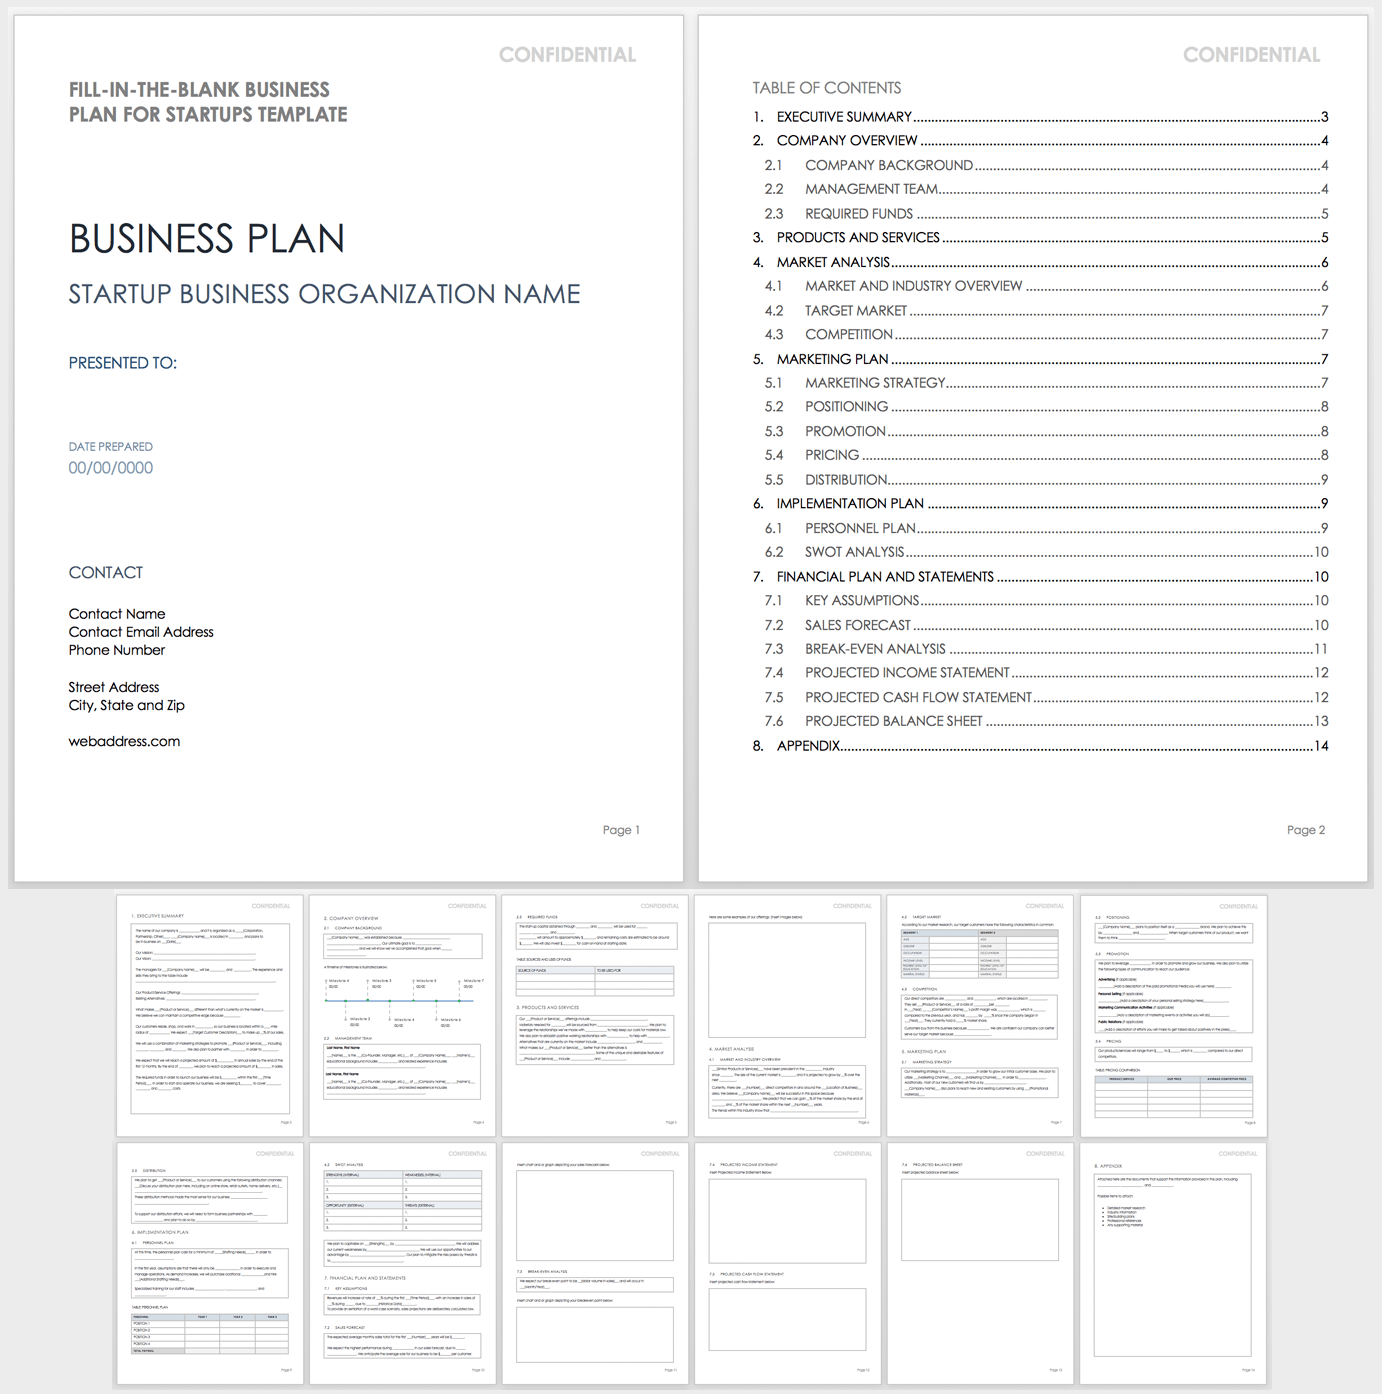 Fill-In-the-Blank Business Plans  Smartsheet Pertaining To Property Development Business Plan Template Free